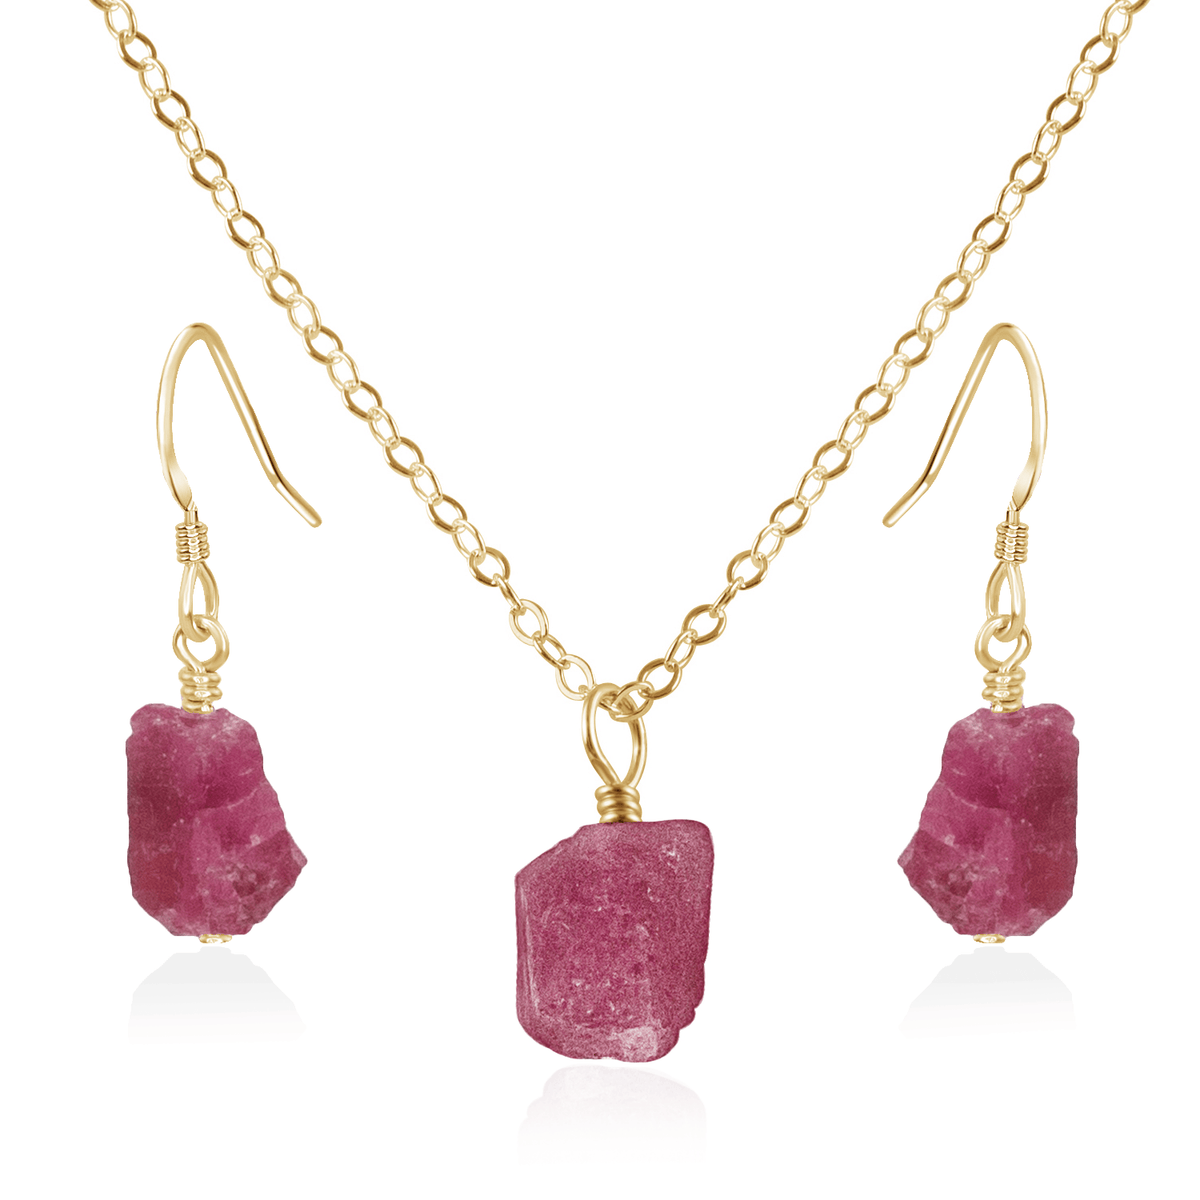 Raw Pink Tourmaline Crystal Earrings & Necklace Set - Raw Pink Tourmaline Crystal Earrings & Necklace Set - 14k Gold Fill / Cable - Luna Tide Handmade Crystal Jewellery